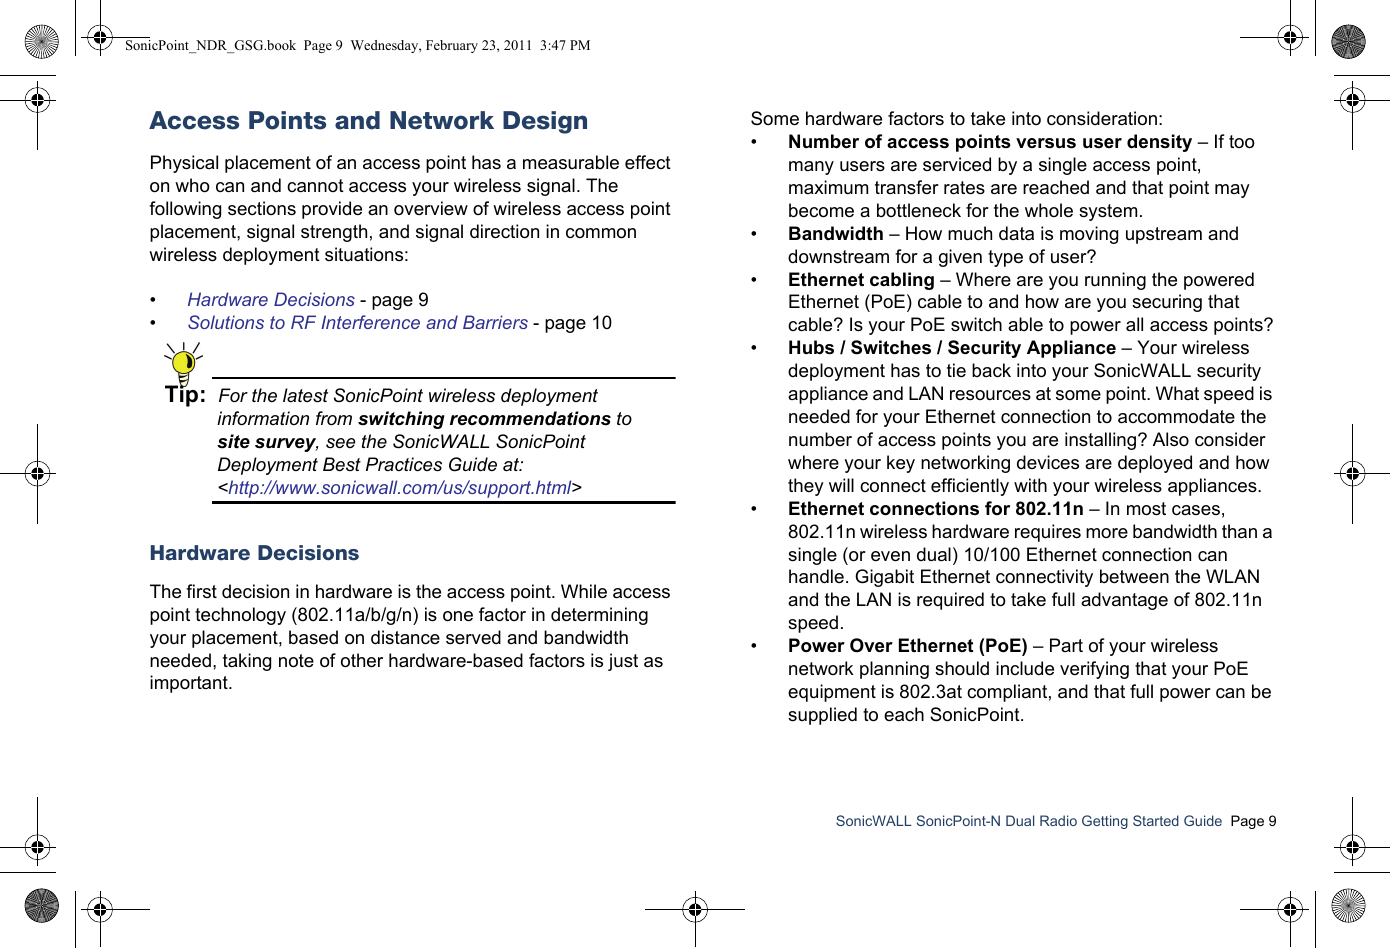 SonicWALL SonicPoint-N Dual Radio Getting Started Guide  Page 9Access Points and Network DesignPhysical placement of an access point has a measurable effect on who can and cannot access your wireless signal. The following sections provide an overview of wireless access point placement, signal strength, and signal direction in common wireless deployment situations:•Hardware Decisions - page 9•Solutions to RF Interference and Barriers - page 10Tip:  For the latest SonicPoint wireless deployment information from switching recommendations tosite survey, see the SonicWALL SonicPoint Deployment Best Practices Guide at: &lt;http://www.sonicwall.com/us/support.html&gt;Hardware DecisionsThe first decision in hardware is the access point. While access point technology (802.11a/b/g/n) is one factor in determining your placement, based on distance served and bandwidth needed, taking note of other hardware-based factors is just as important. Some hardware factors to take into consideration:•Number of access points versus user density – If too many users are serviced by a single access point, maximum transfer rates are reached and that point may become a bottleneck for the whole system.•Bandwidth – How much data is moving upstream and downstream for a given type of user?•Ethernet cabling – Where are you running the powered Ethernet (PoE) cable to and how are you securing that cable? Is your PoE switch able to power all access points?•Hubs / Switches / Security Appliance – Your wireless deployment has to tie back into your SonicWALL security appliance and LAN resources at some point. What speed is needed for your Ethernet connection to accommodate the number of access points you are installing? Also consider where your key networking devices are deployed and how they will connect efficiently with your wireless appliances.•Ethernet connections for 802.11n – In most cases, 802.11n wireless hardware requires more bandwidth than a single (or even dual) 10/100 Ethernet connection can handle. Gigabit Ethernet connectivity between the WLAN and the LAN is required to take full advantage of 802.11n speed.•Power Over Ethernet (PoE) – Part of your wireless network planning should include verifying that your PoE equipment is 802.3at compliant, and that full power can be supplied to each SonicPoint.SonicPoint_NDR_GSG.book  Page 9  Wednesday, February 23, 2011  3:47 PM